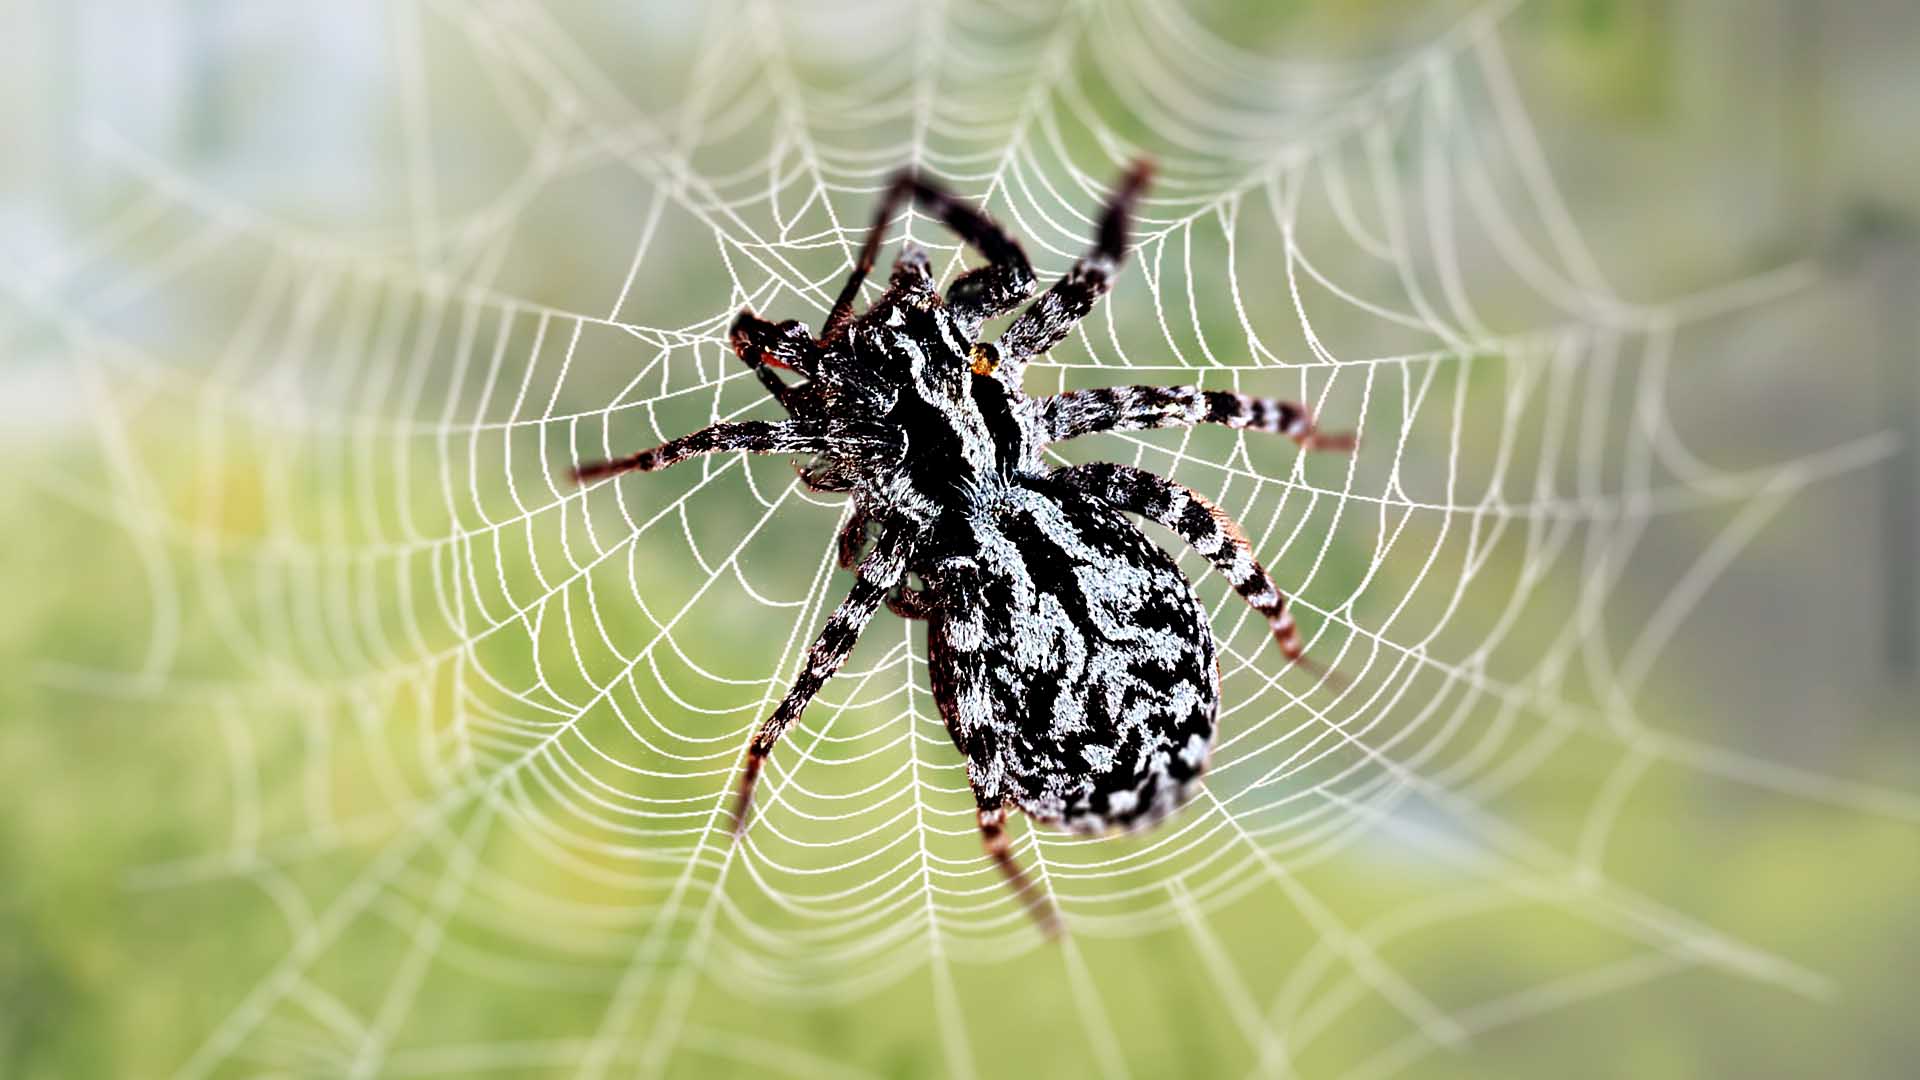 Black Fuzzy Spider With White Spots